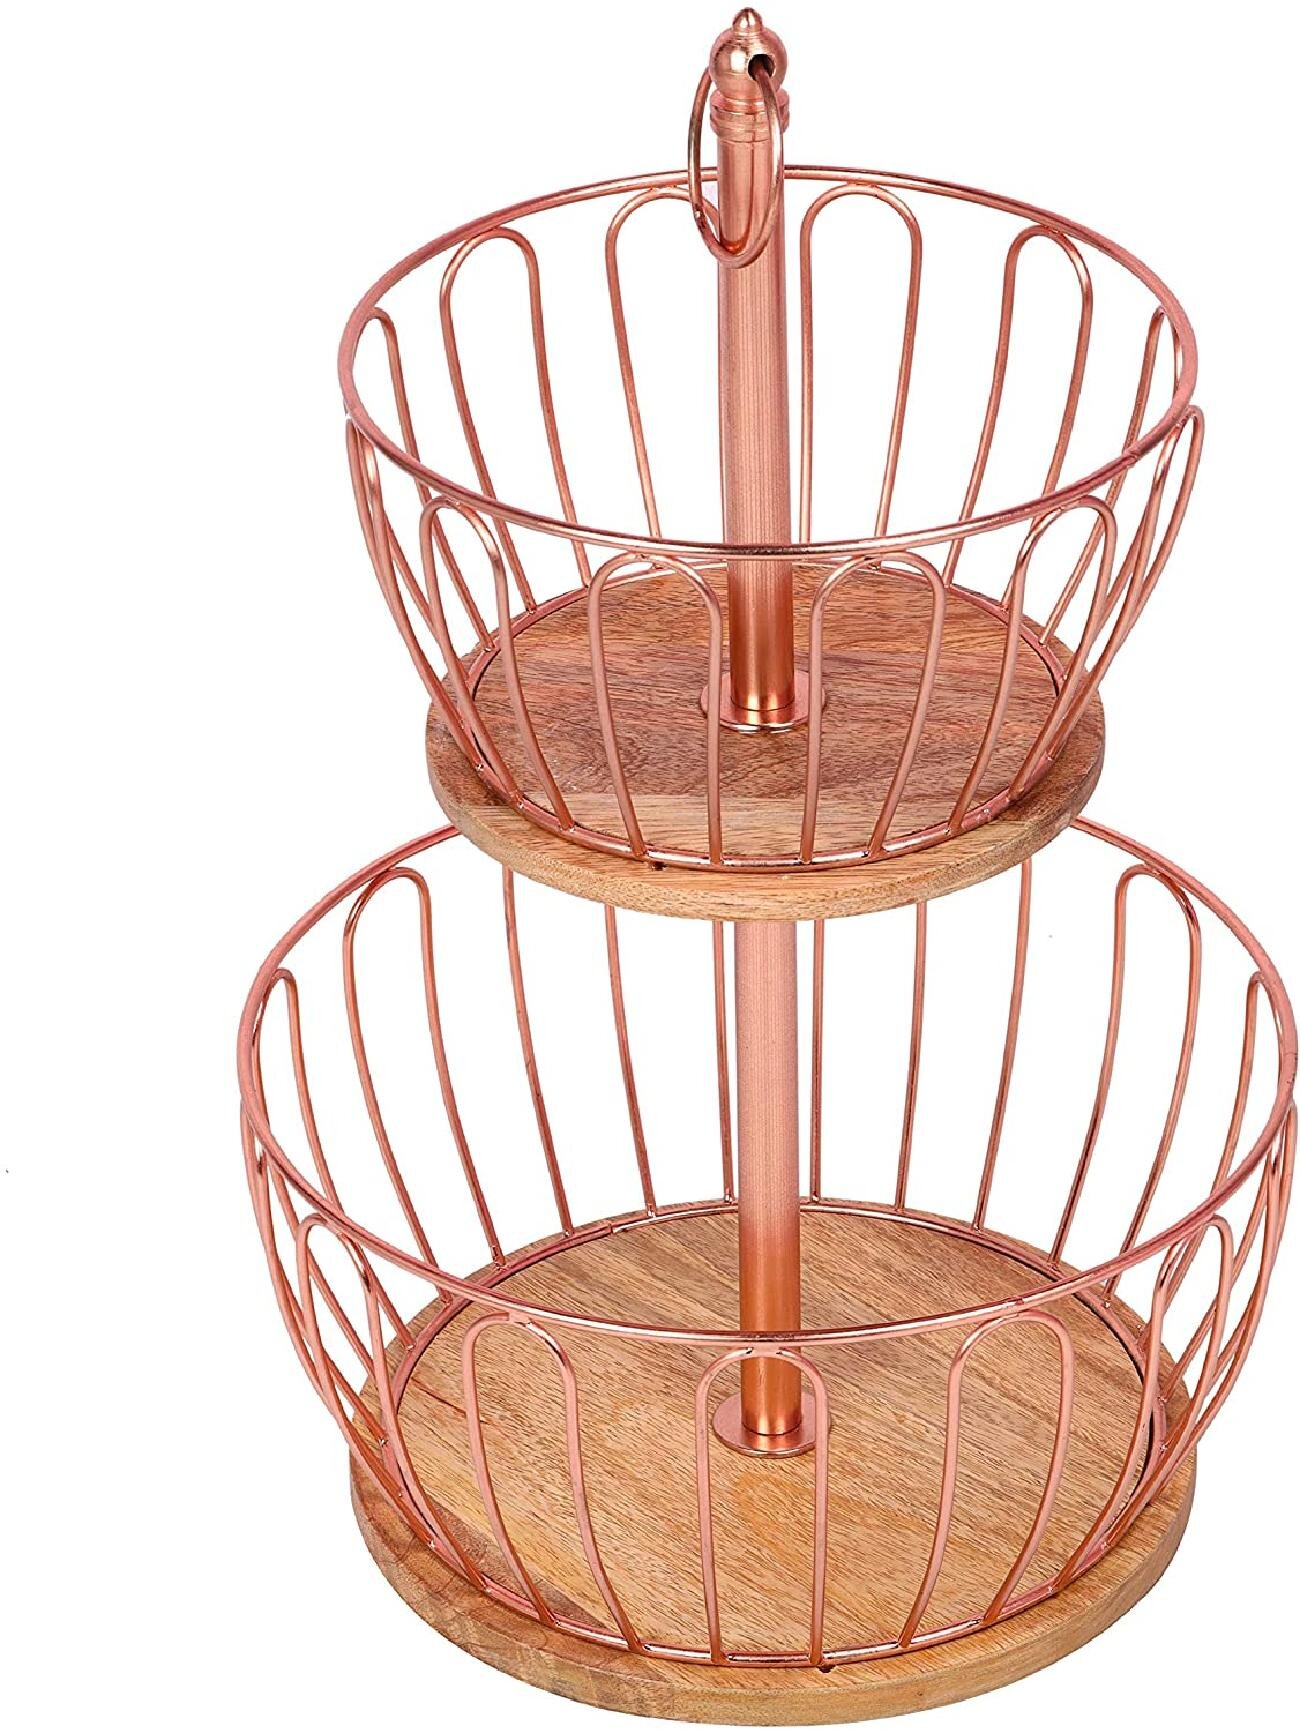 Gelaosidun 2 Tier Fruit Basket With Mango Wood Base Stylish Durable And Vegetable Storage Rack Perfect Hanging Wire Bowl For Kitchens Dining Rooms And Pantries Wayfair